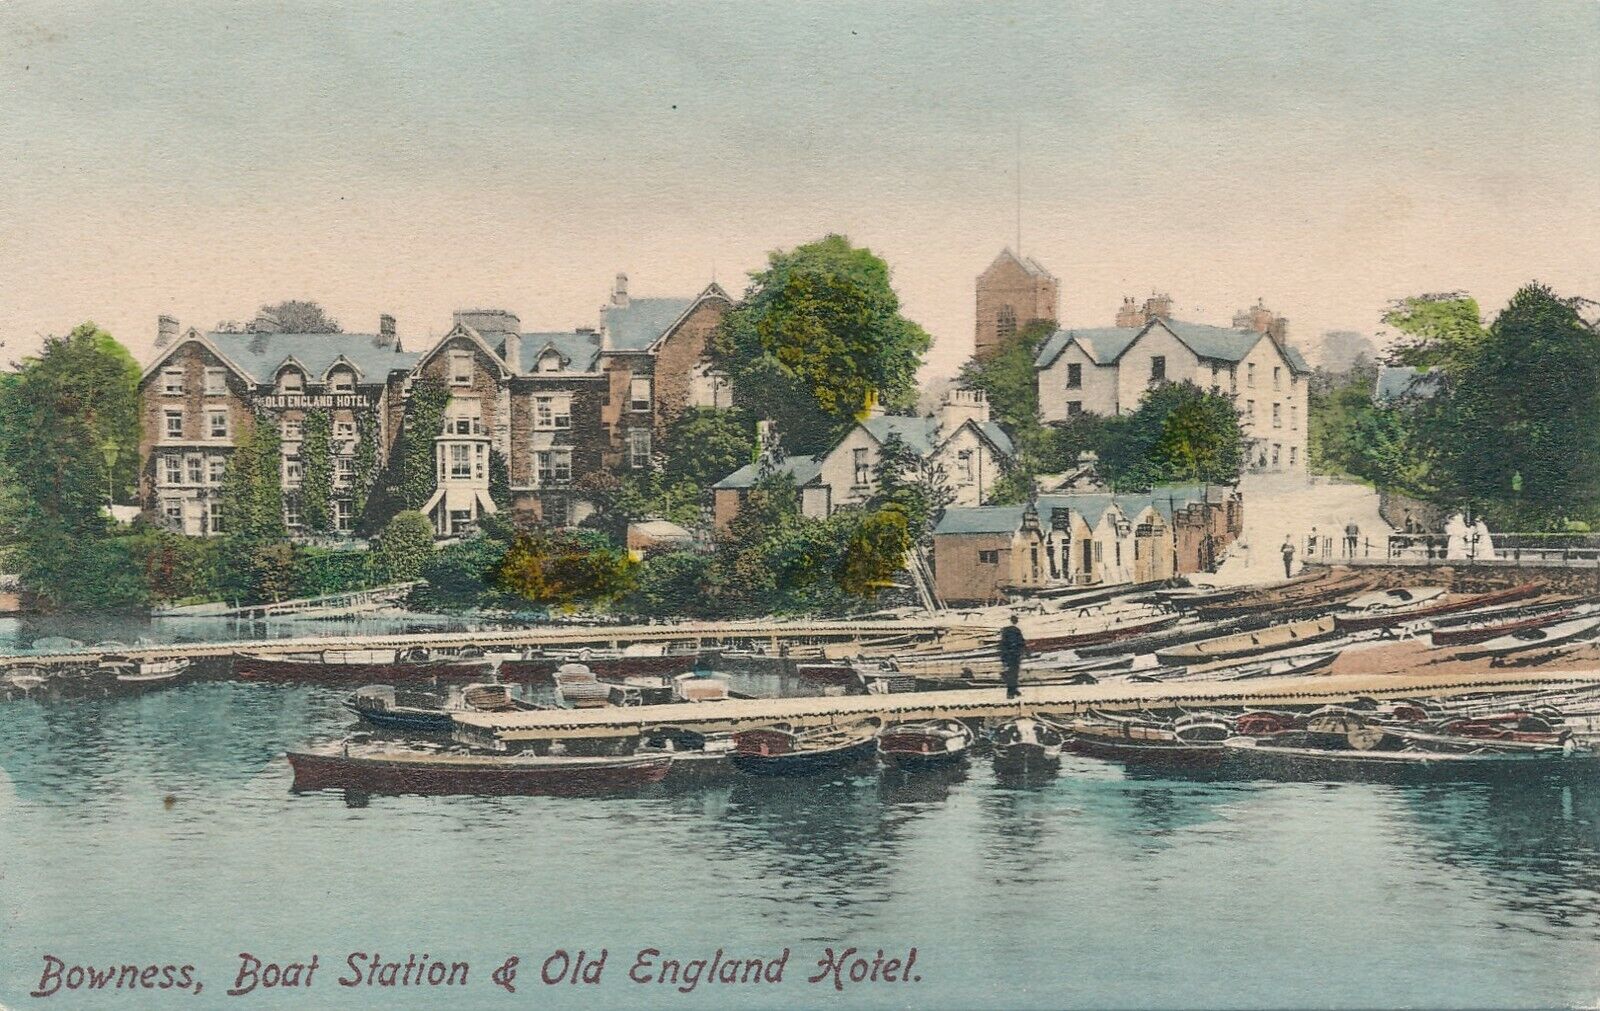 BOWNESS – Boat Station and Old England Hotel – Cumbria – England